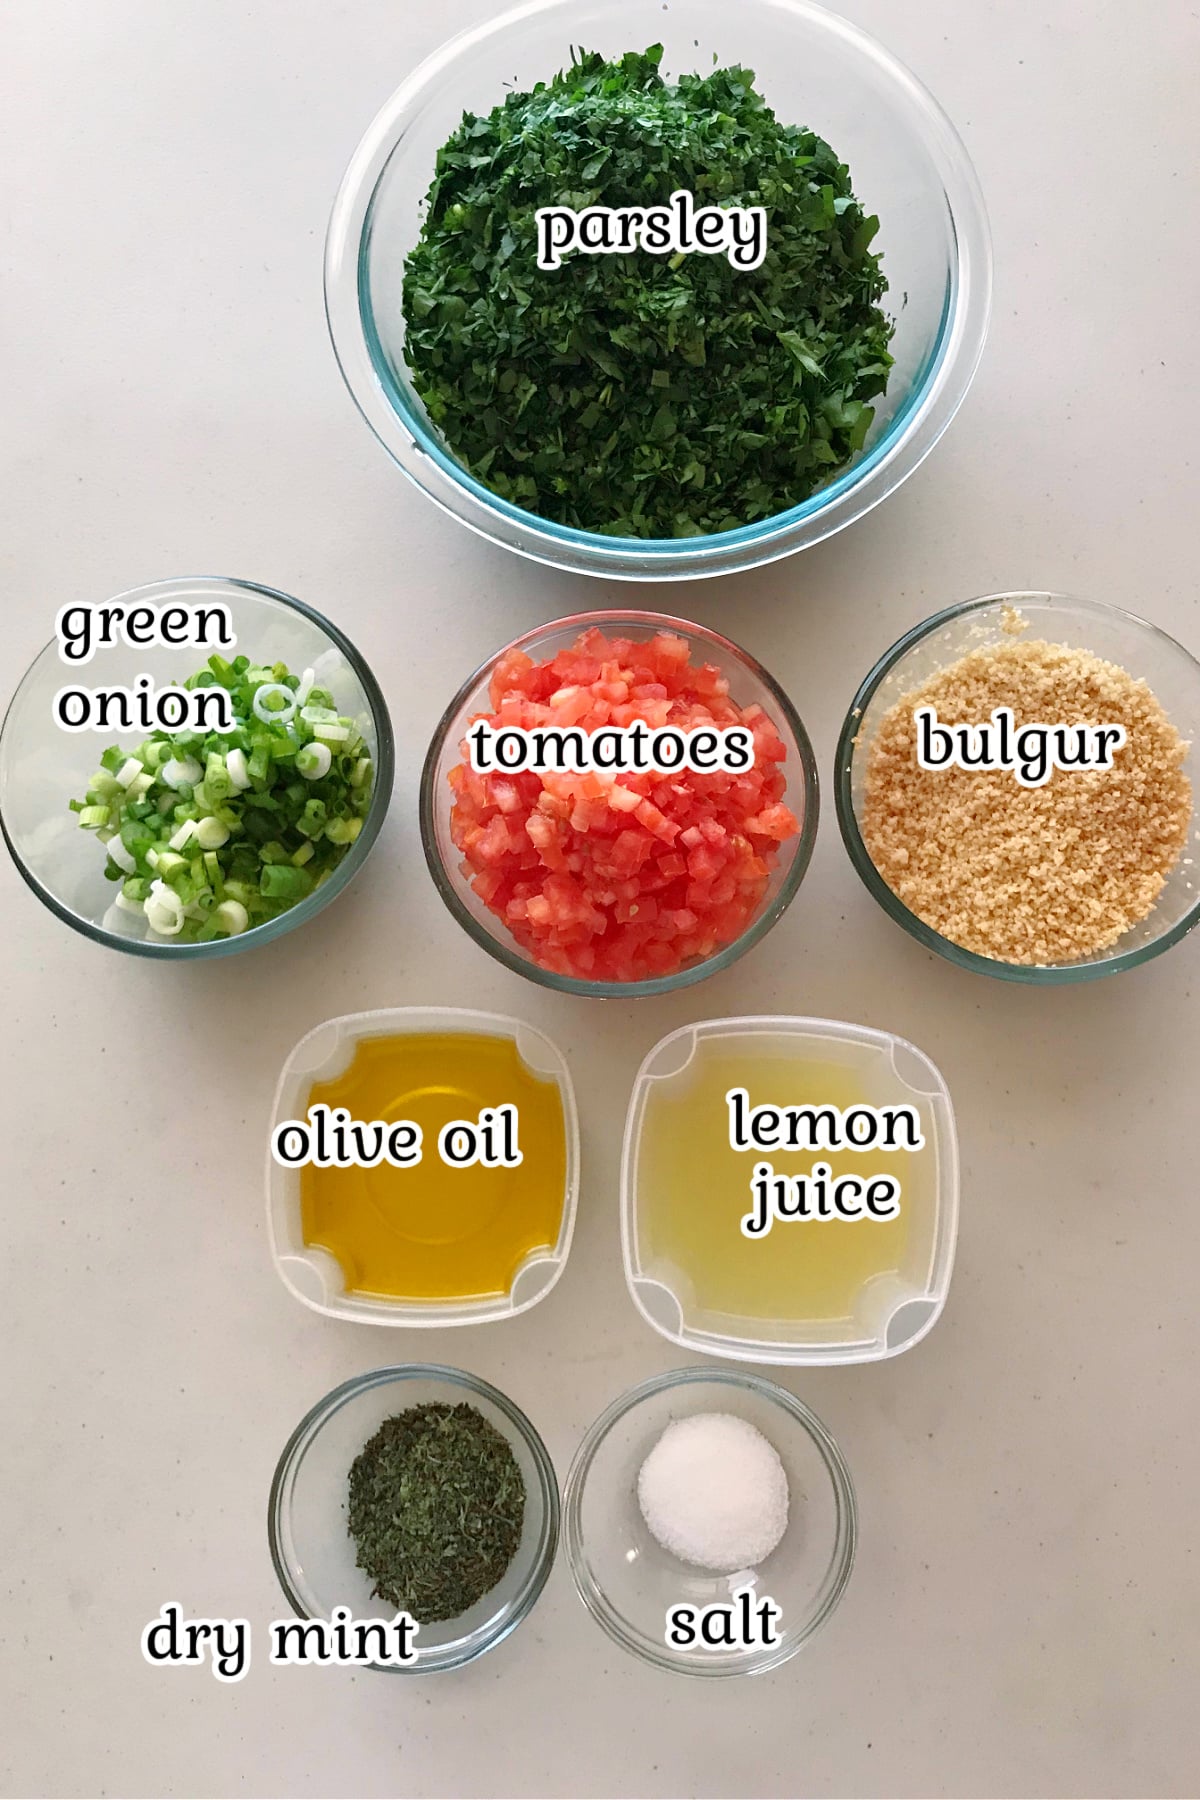 Ingredients for tabouli recipe with text overlay.